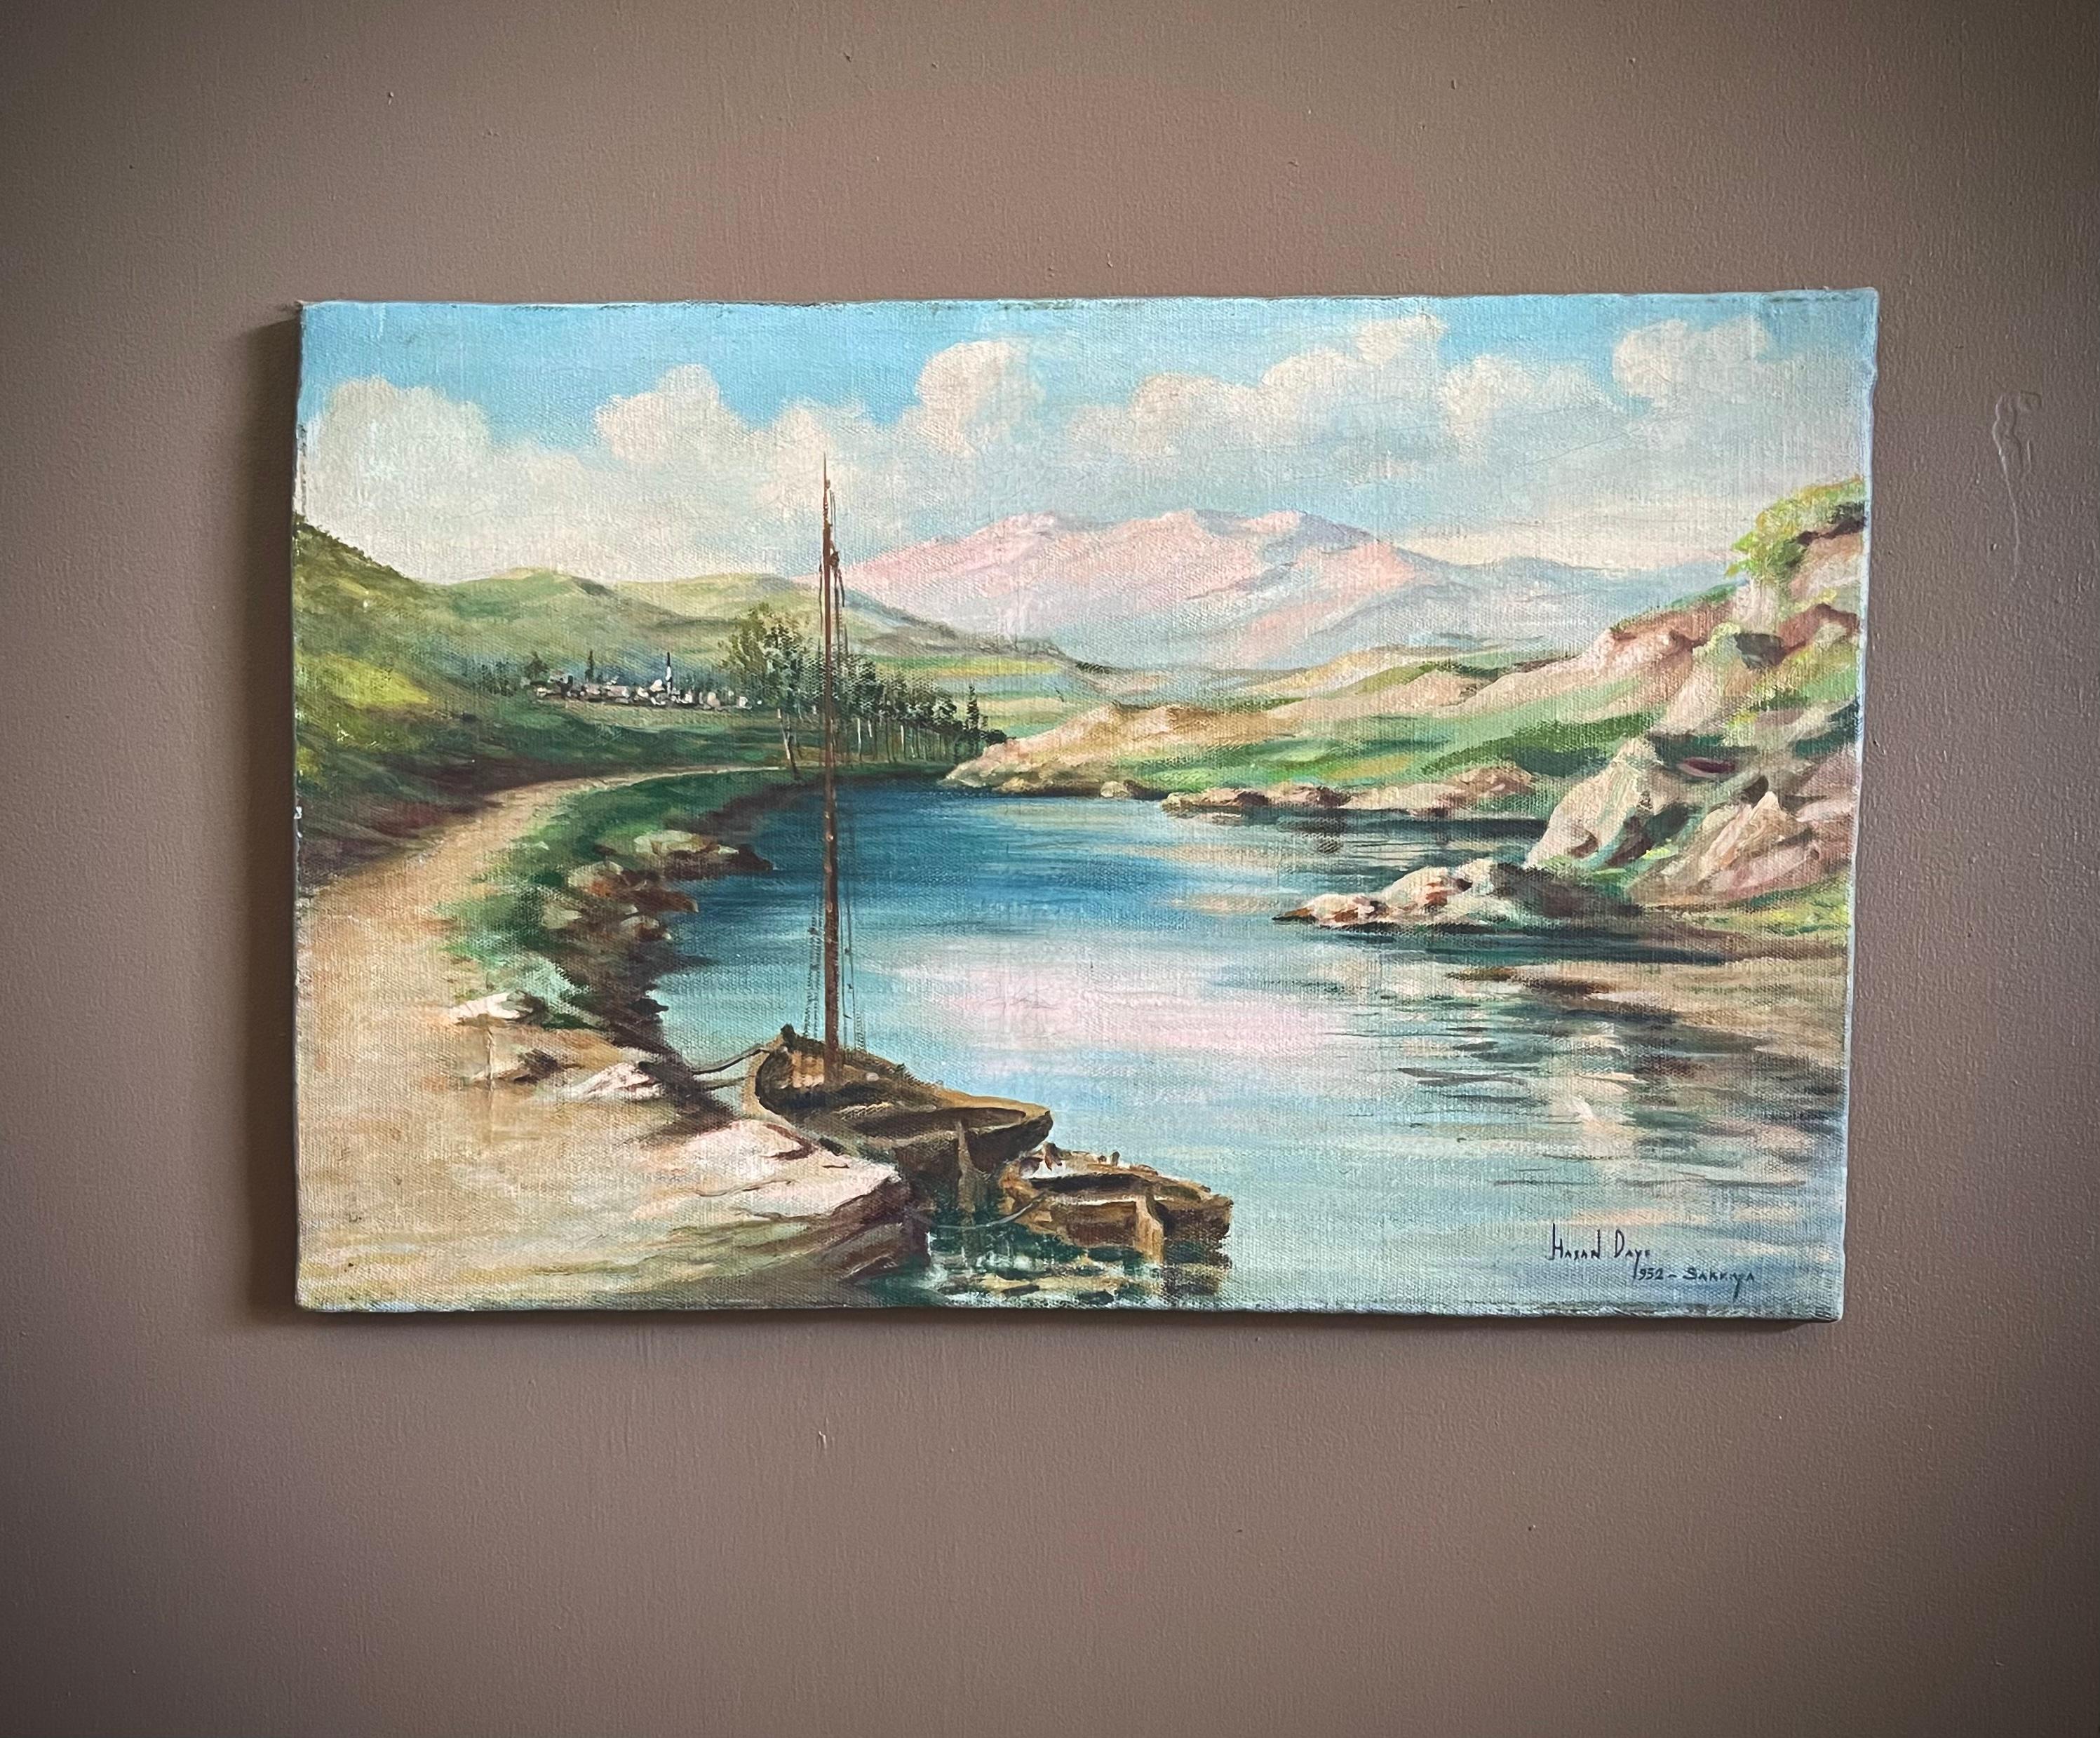 Step into the past with this enchanting 1952 Dutch oil painting capturing the serenity of a sailboat with its attached dingy gracefully navigating through a tranquil sound, framed by majestic mountains in the background. The artist's meticulous